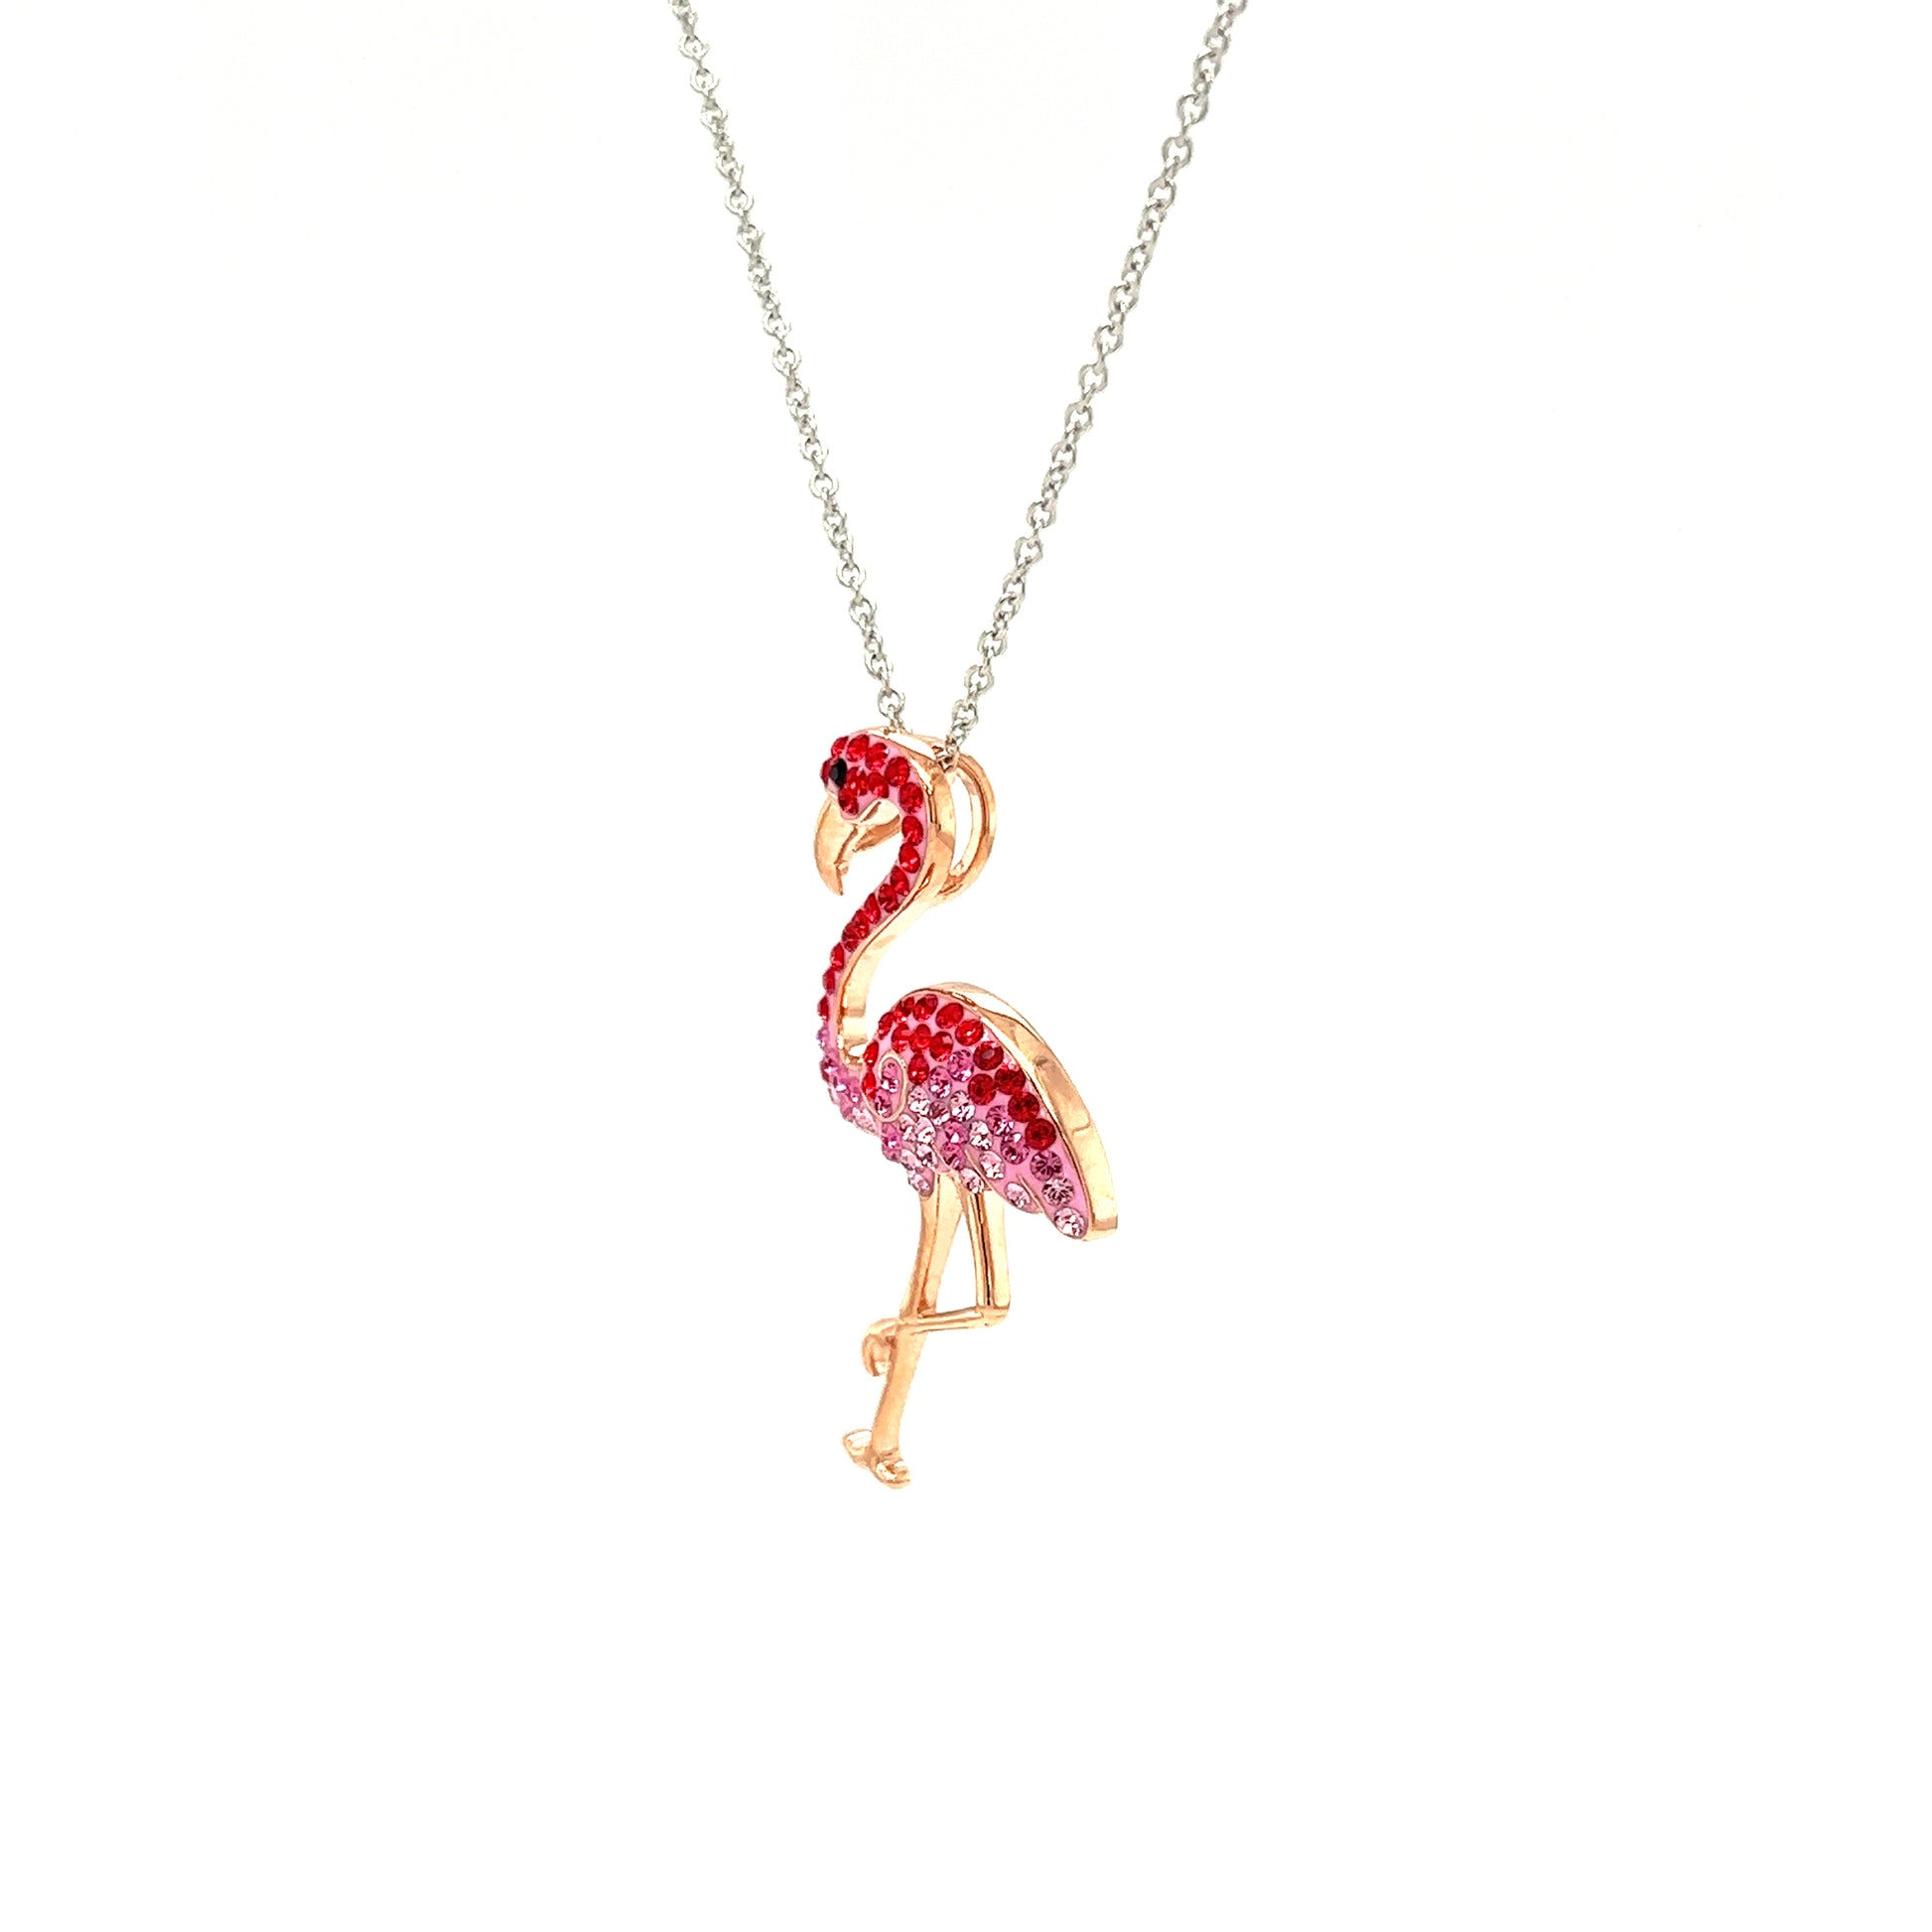 Flamingo Necklace with Red and Pink Crystals and Rose Gold Plating in Sterling Silver Right Side View